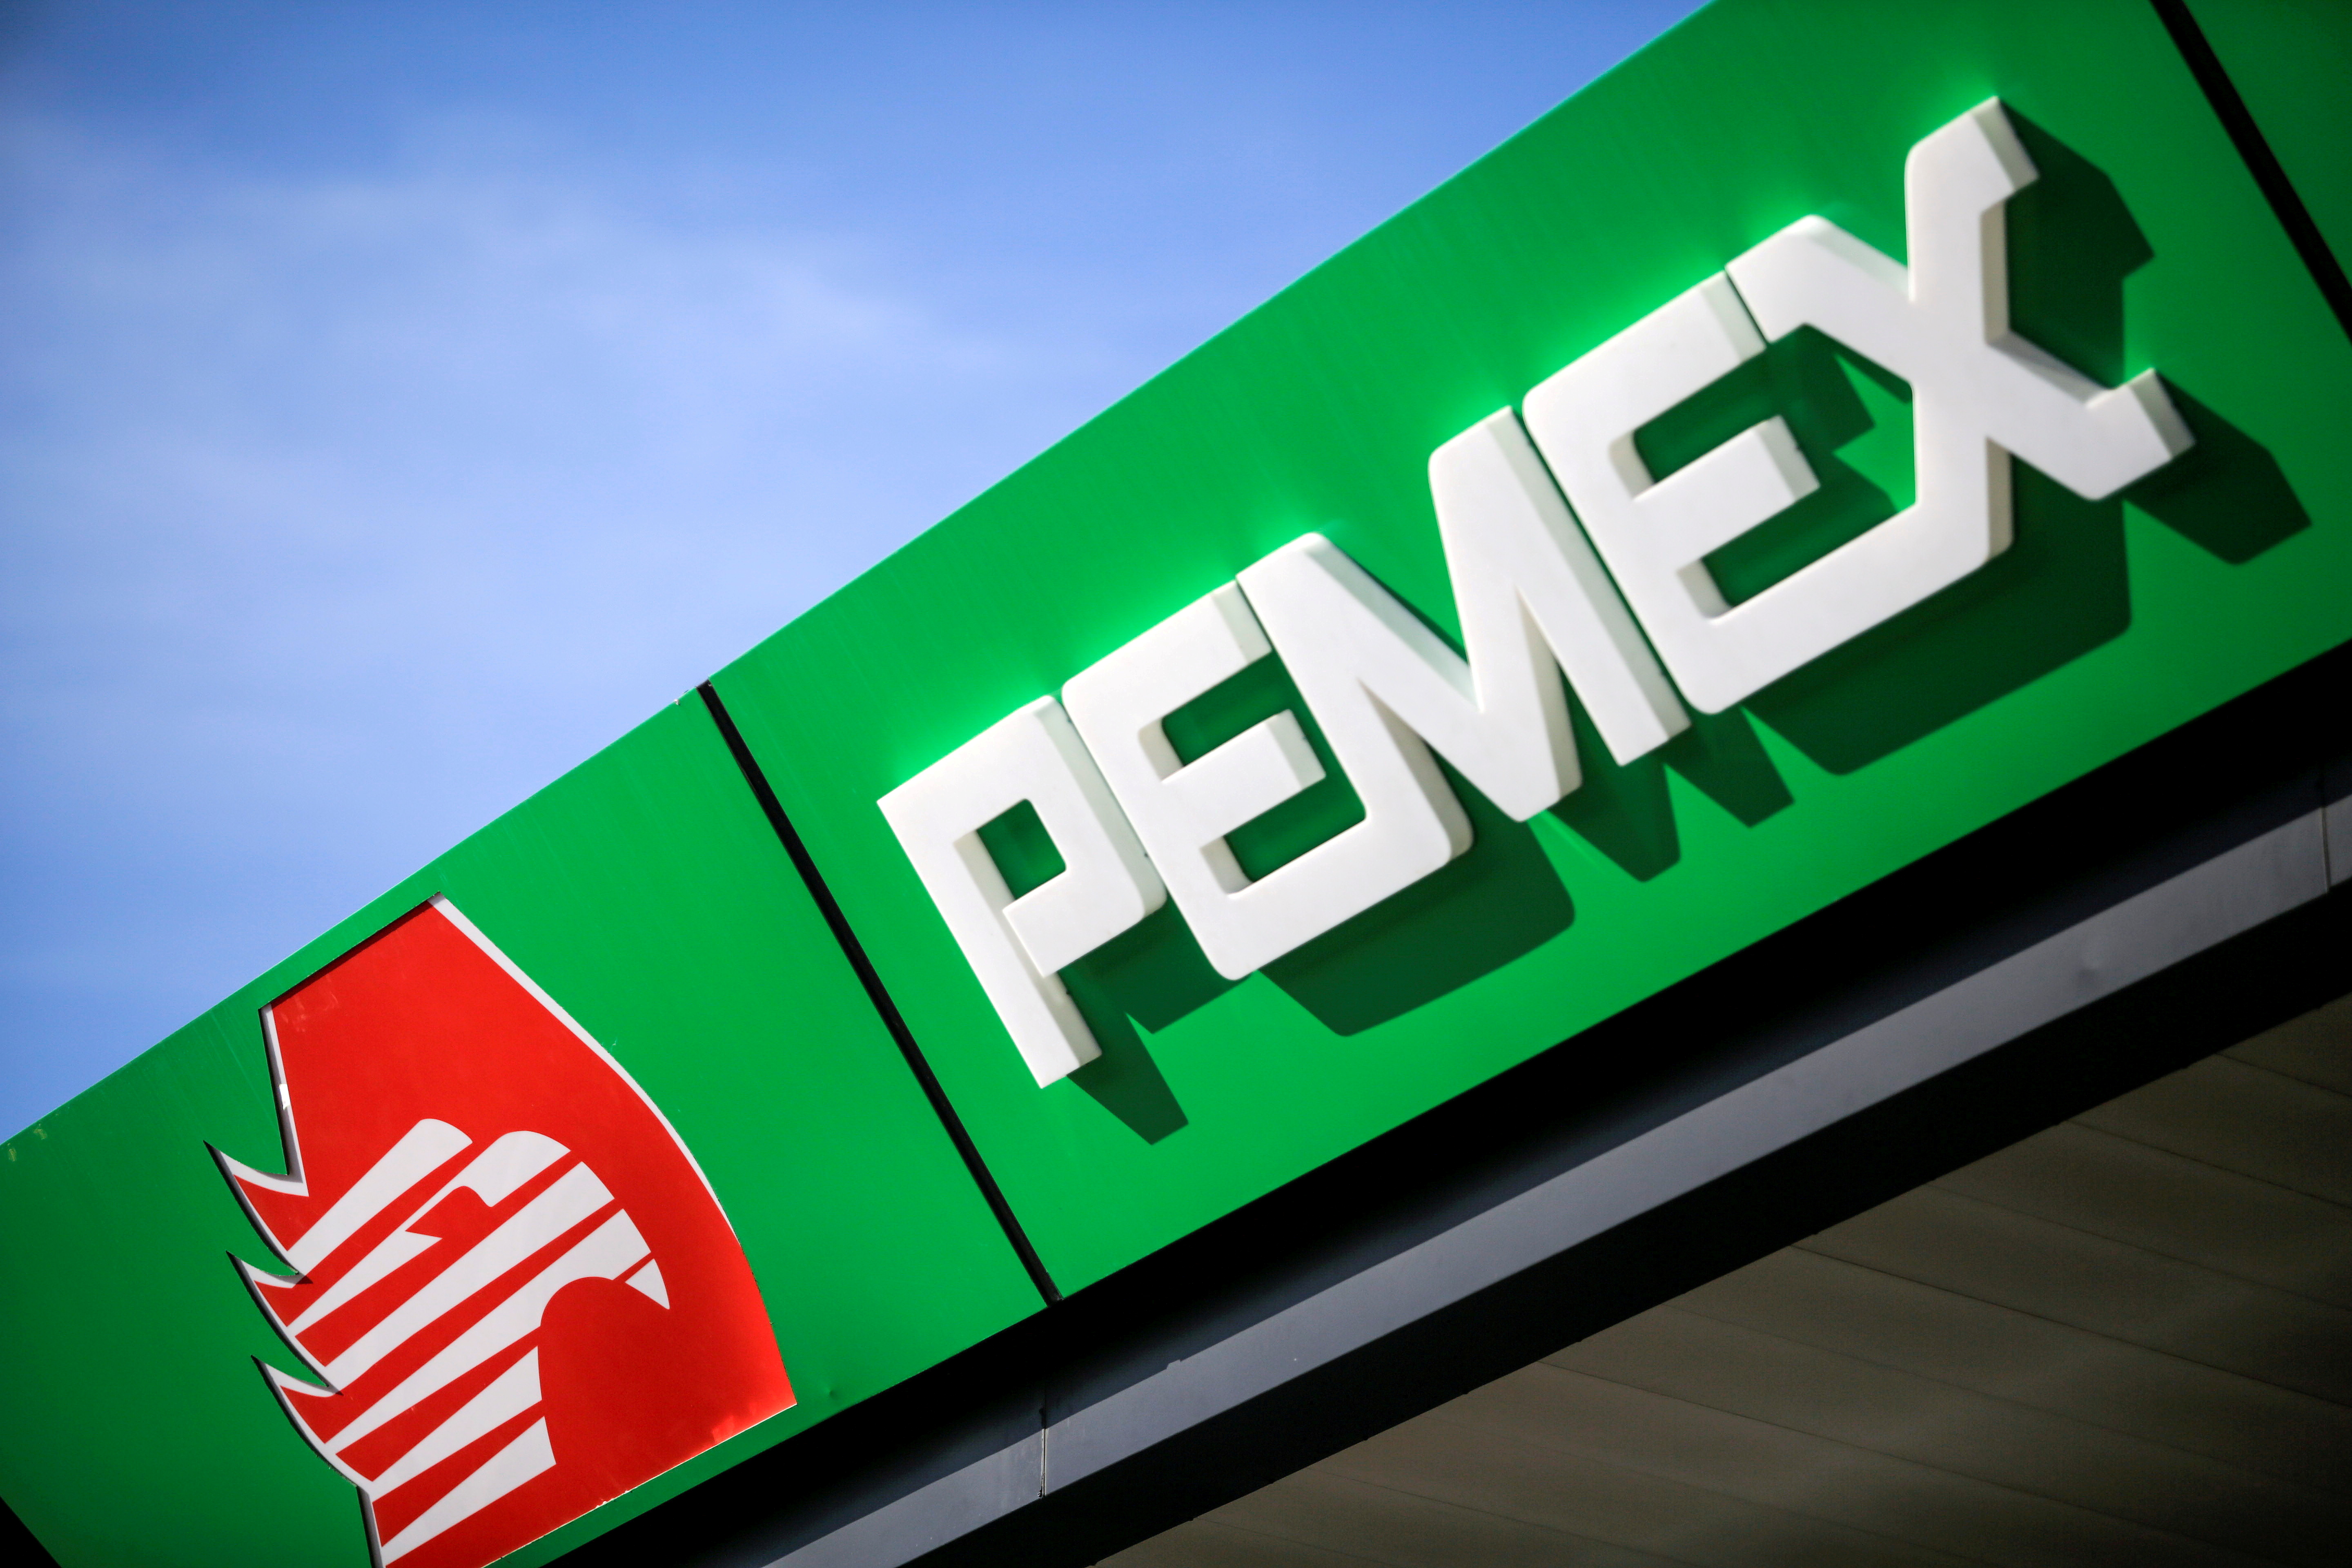 The logo of Mexican state oil company Pemex is pictured at a gas station in Ciudad Juarez